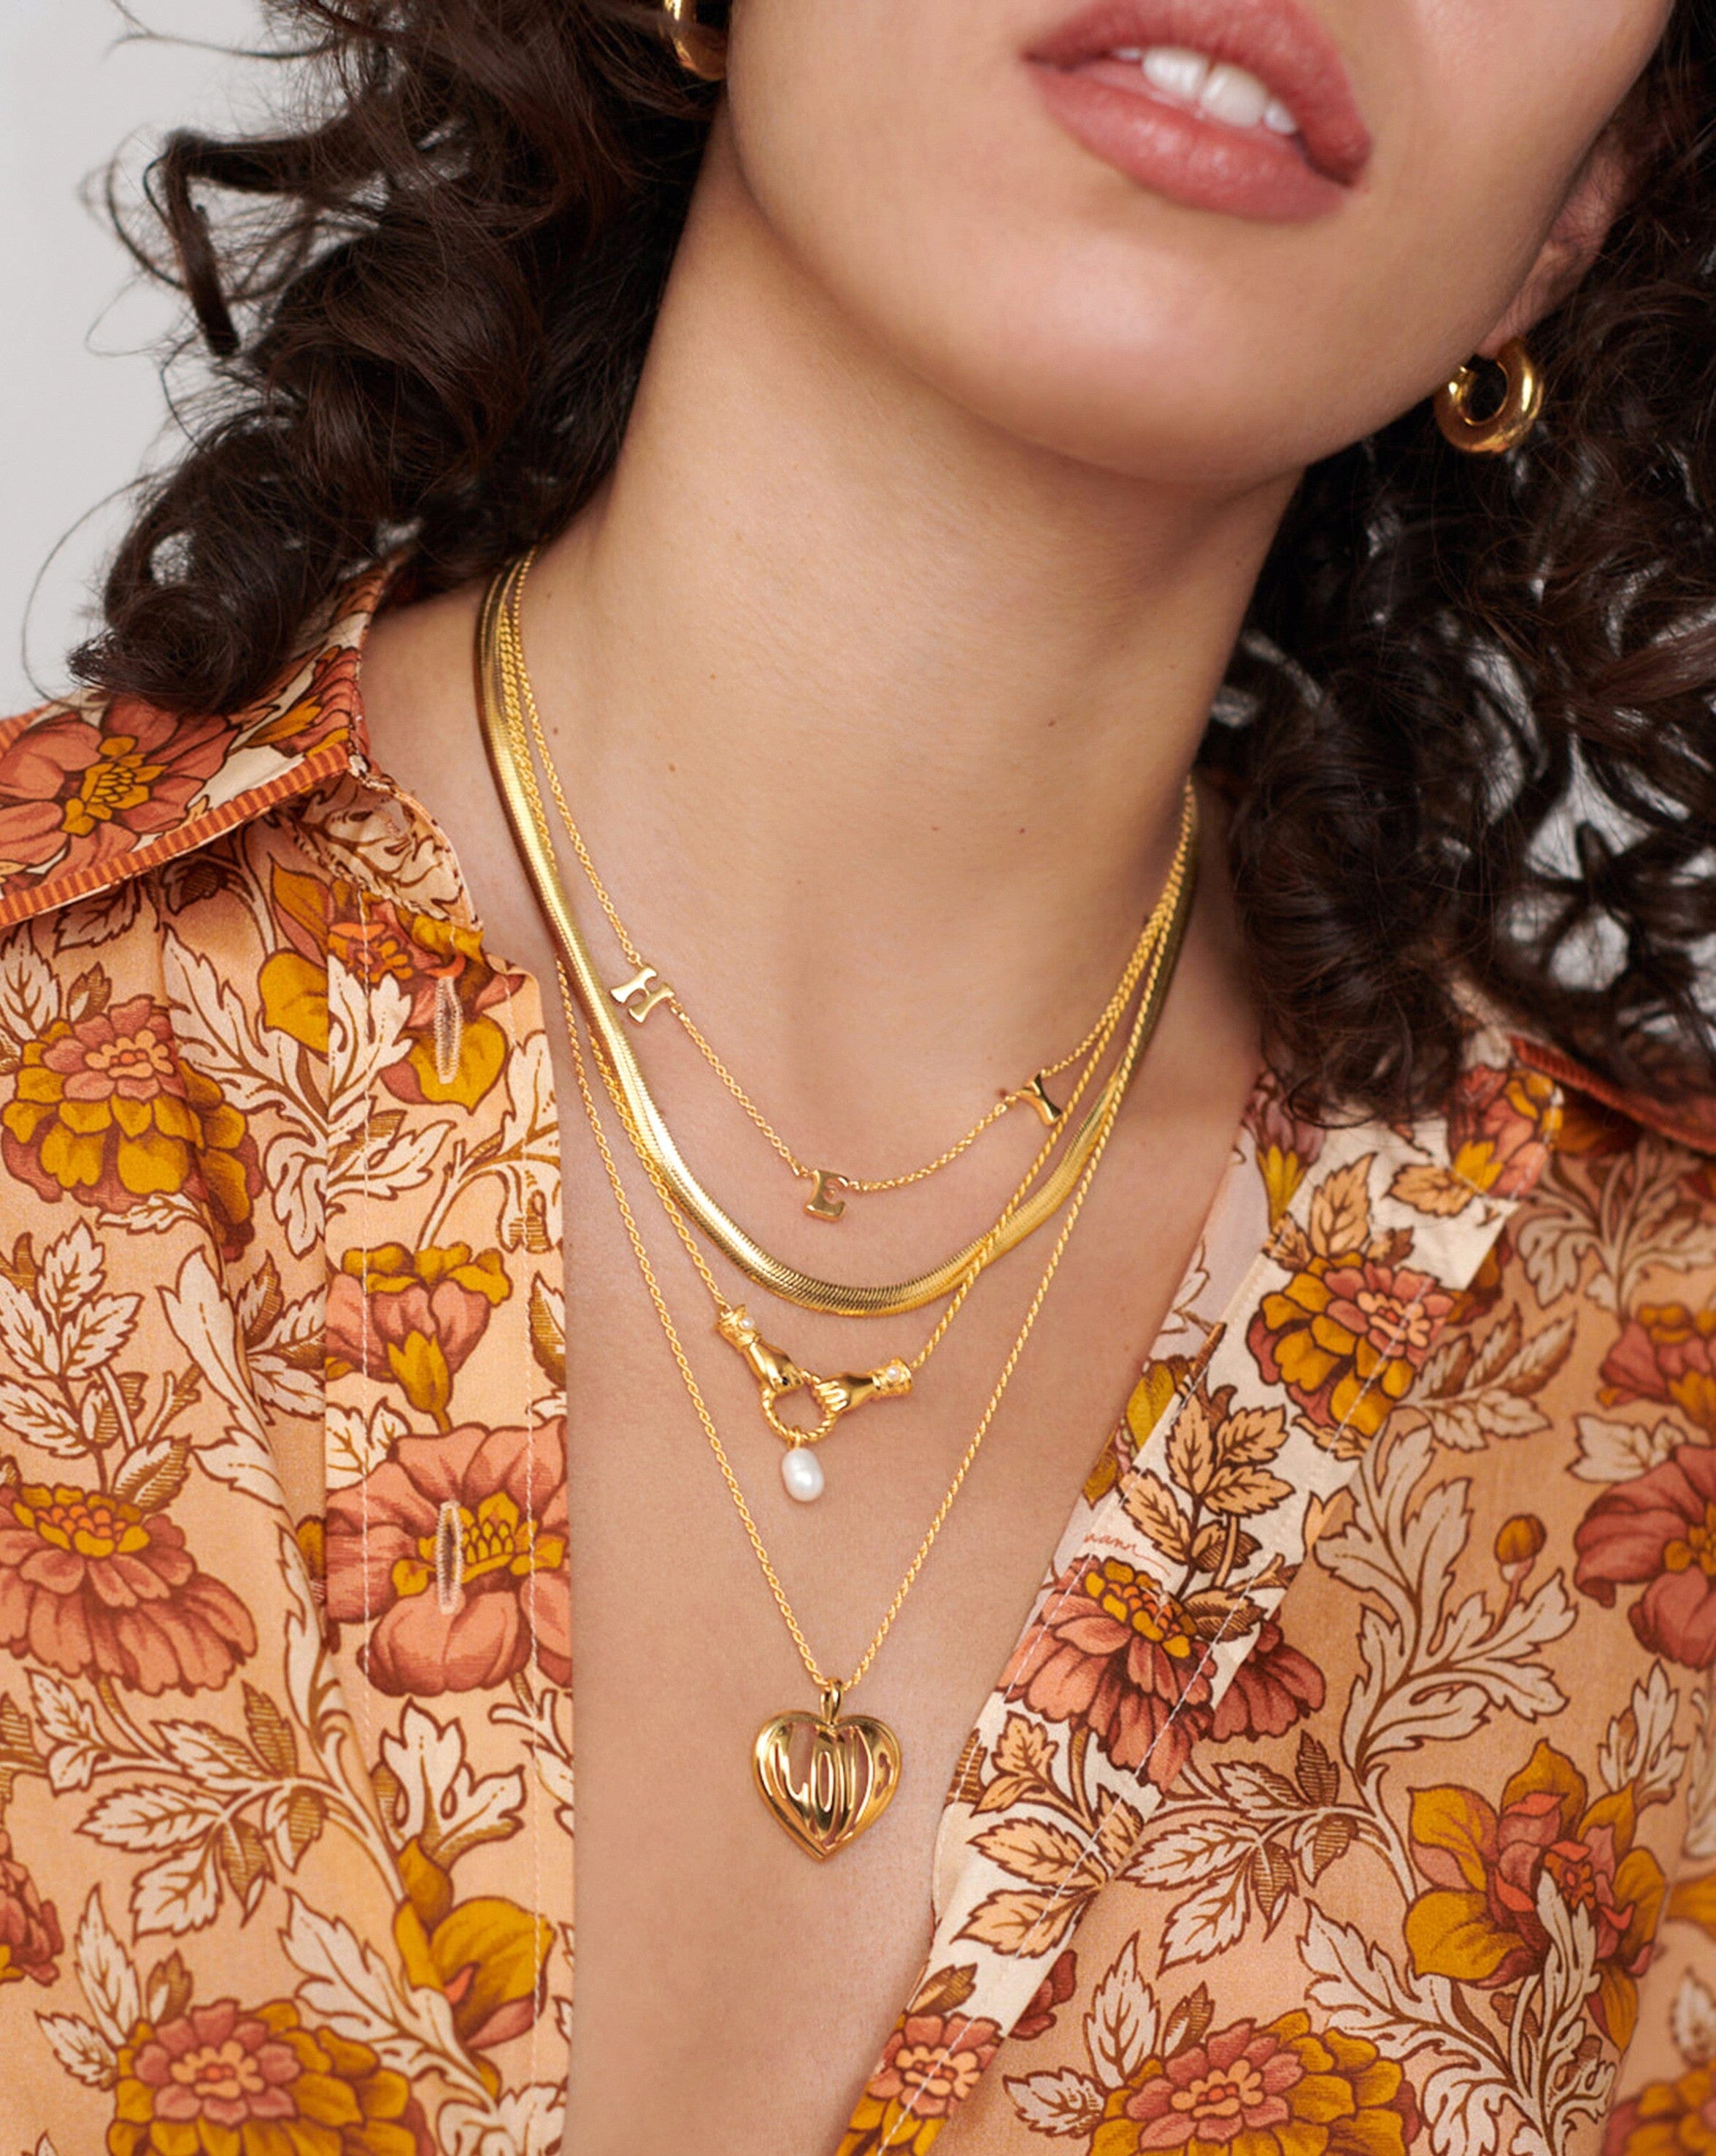 Say Hey Charm Choker | 18ct Gold Plated Vermeil Necklaces Missoma 